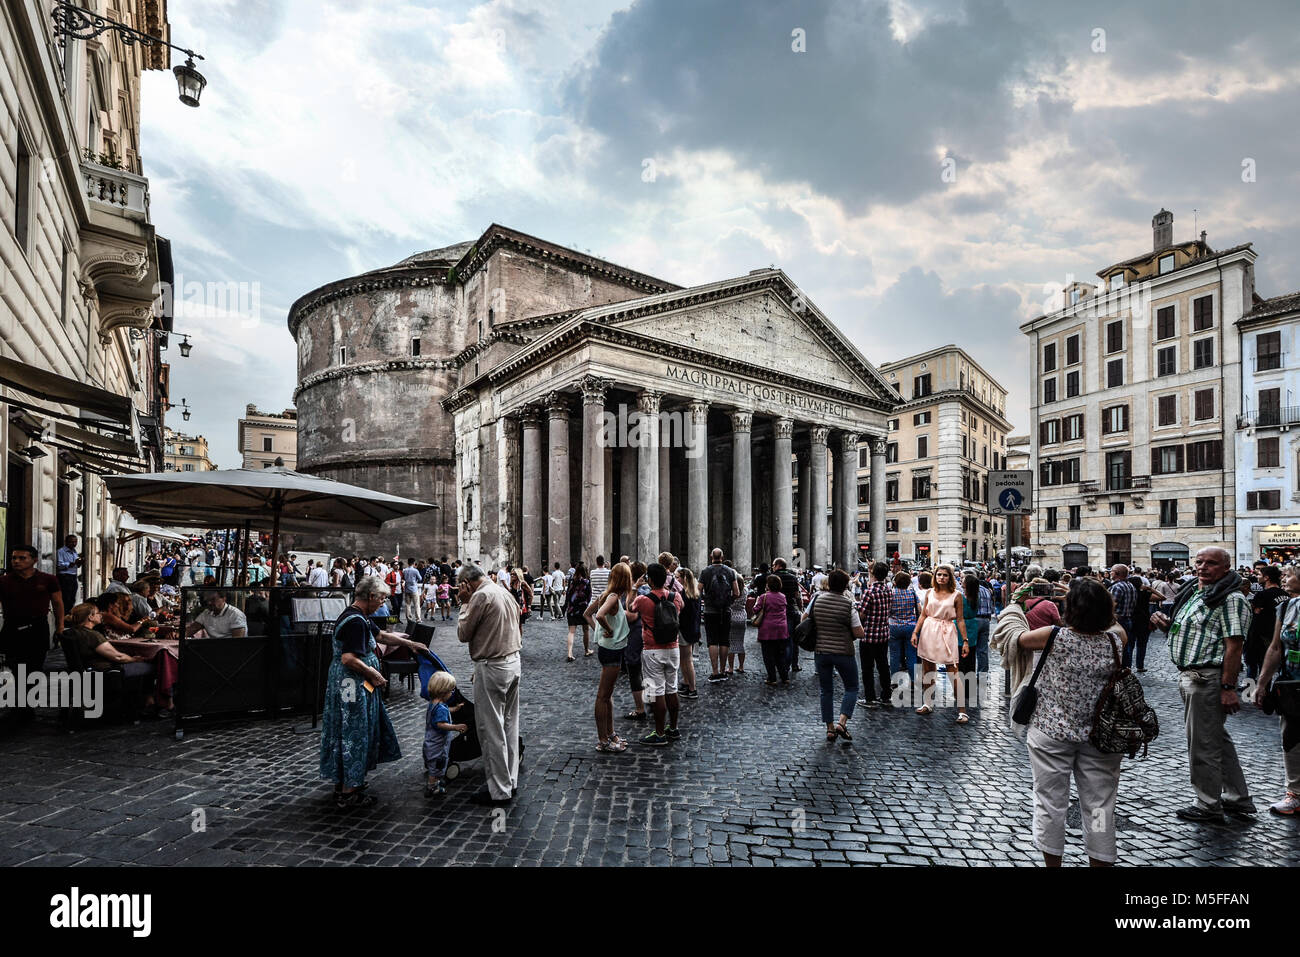 The crowded Piazza della Rotonda in Rome Italy as crowds of tourists enjoy the ancient temple and the lively sidewalk cafes Stock Photo